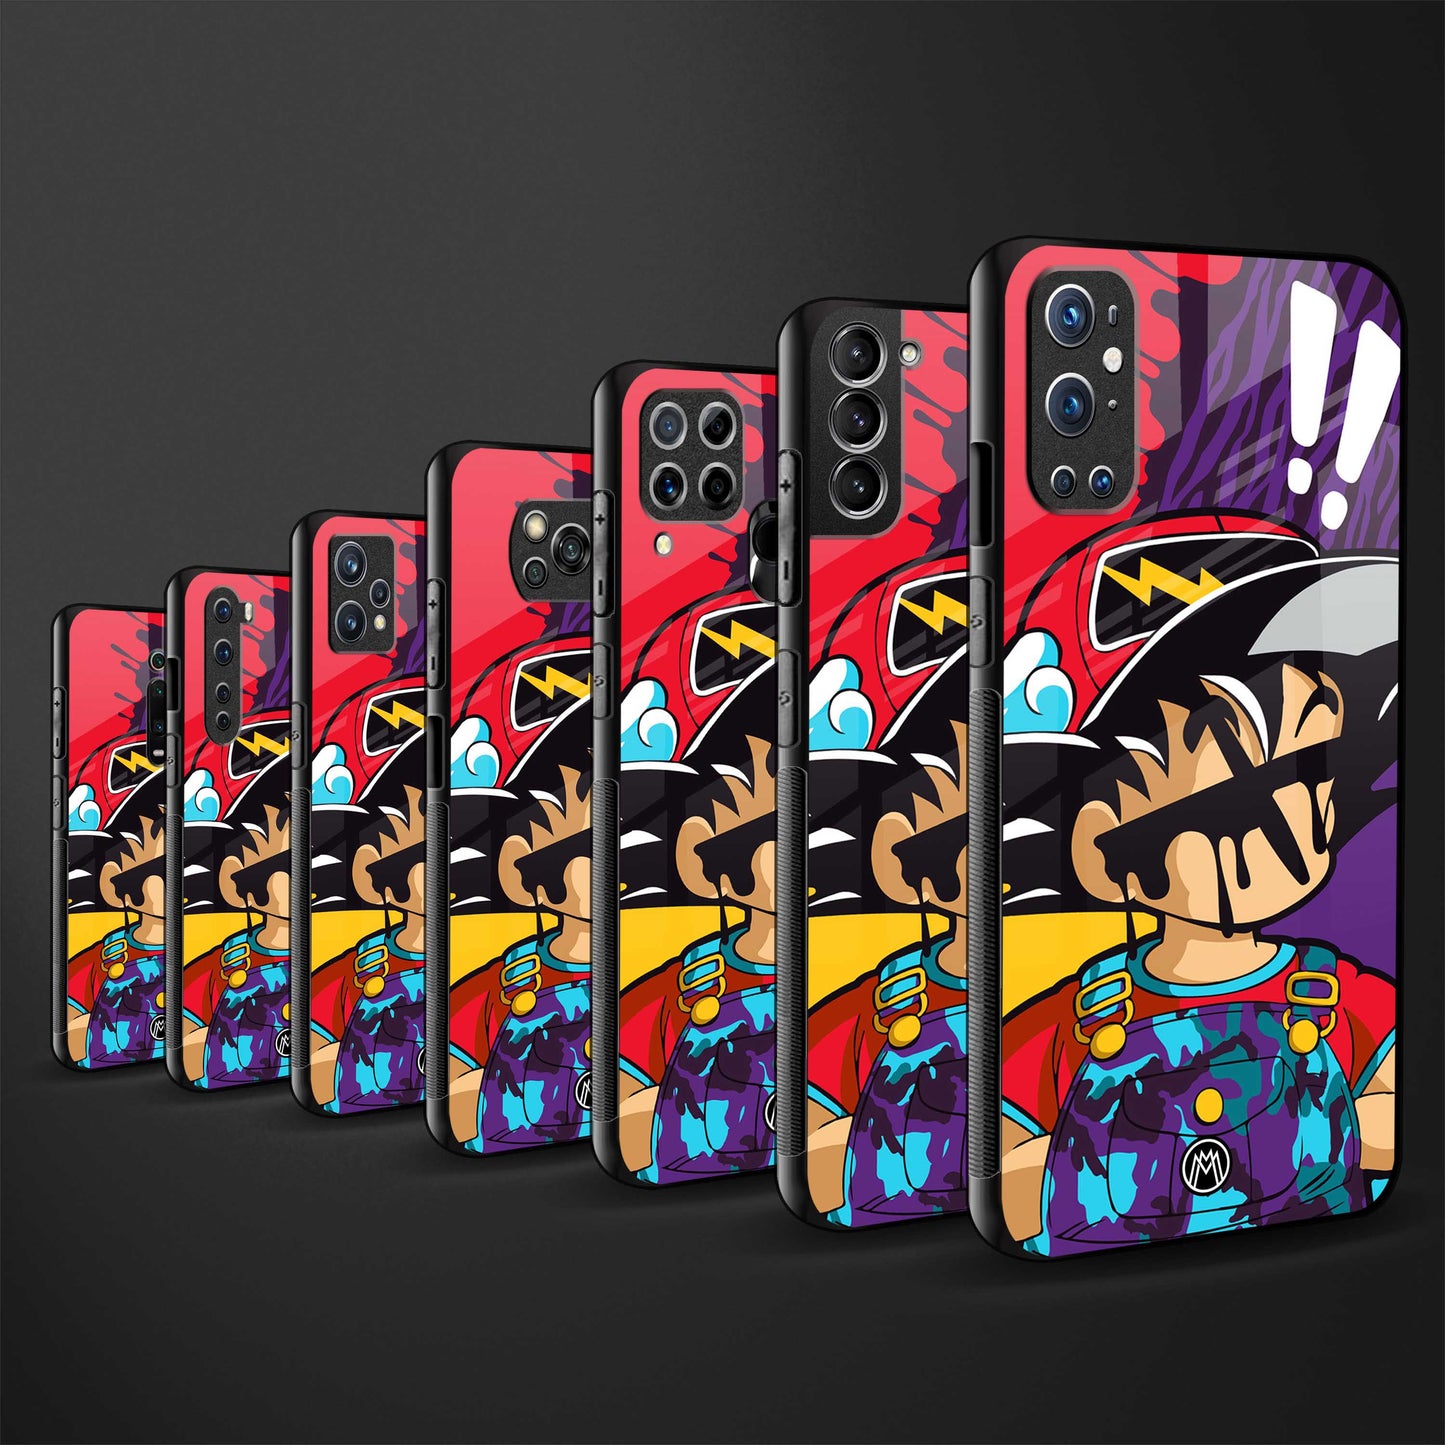 dragon ball z art phone cover for samsung galaxy note 10 plus